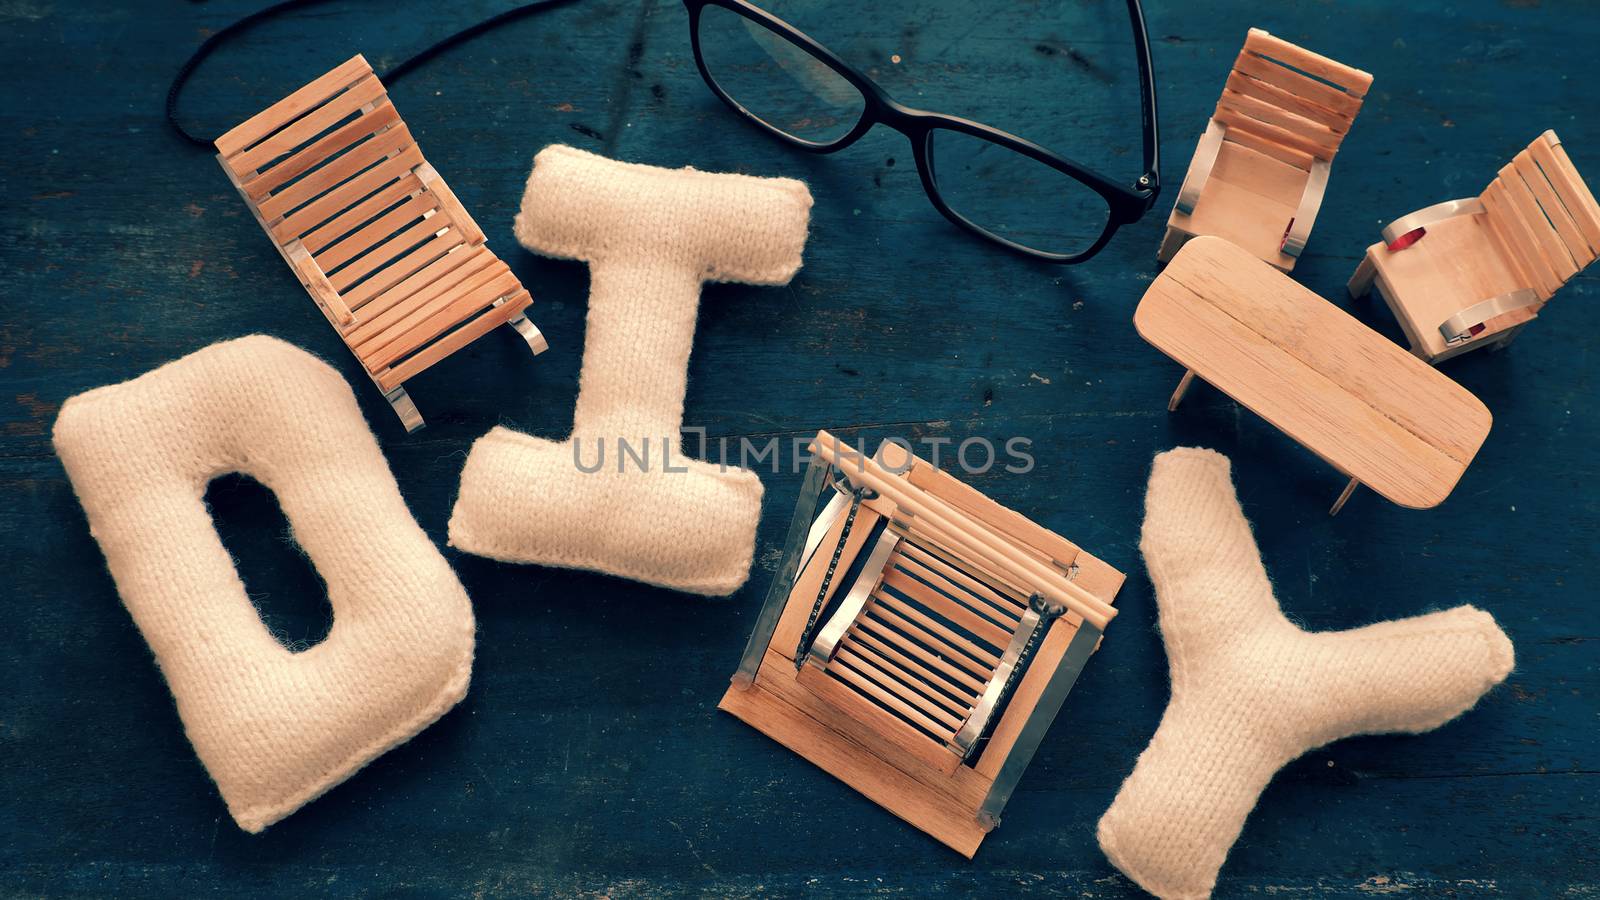 Amazing miniature handmade product for interior design, mini furniture make from wood stick on wooden background, small swing, chair so cute and diy knitted alphabet 